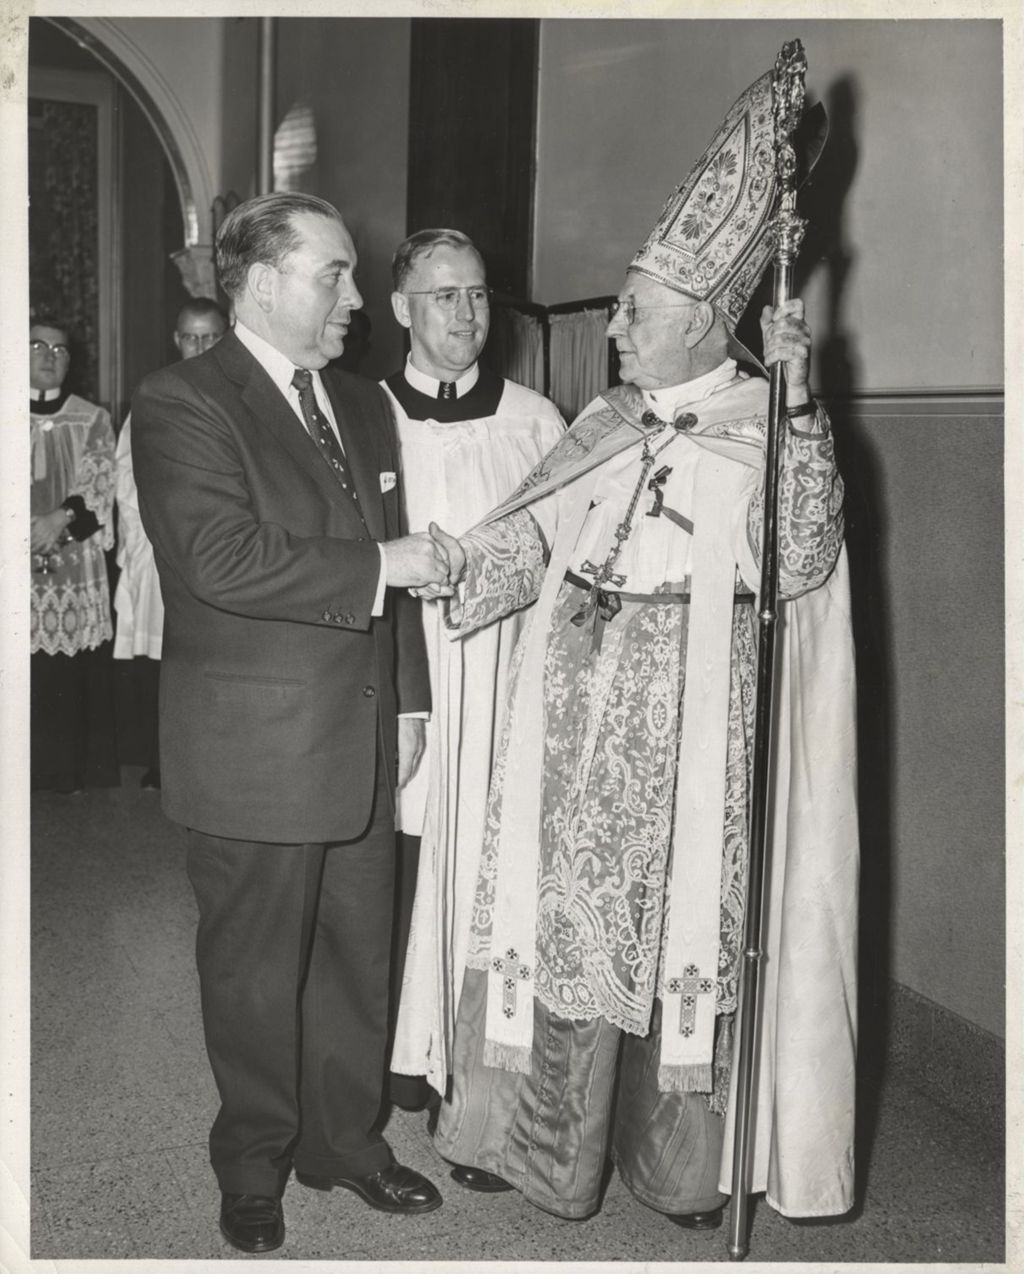 Miniature of Richard J. Daley shaking hands with Cardinal Samuel Stritch